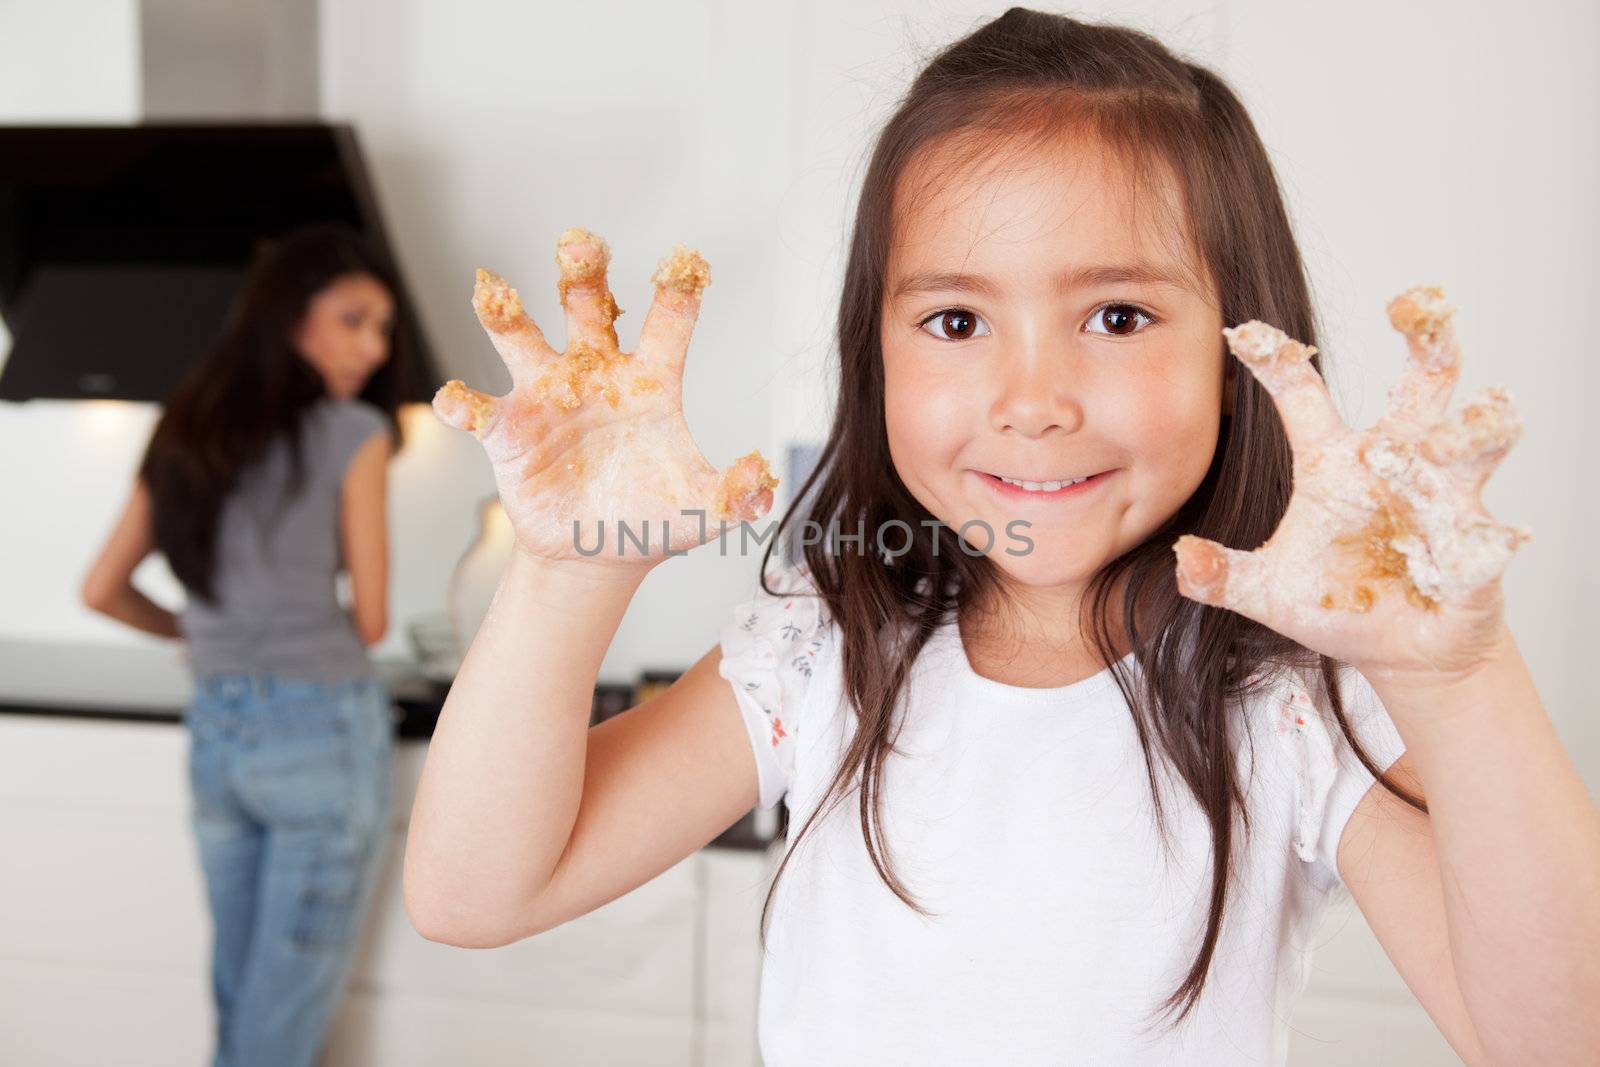 Mother and daughter in kitchen, child looking at camera with cookie dough on hands